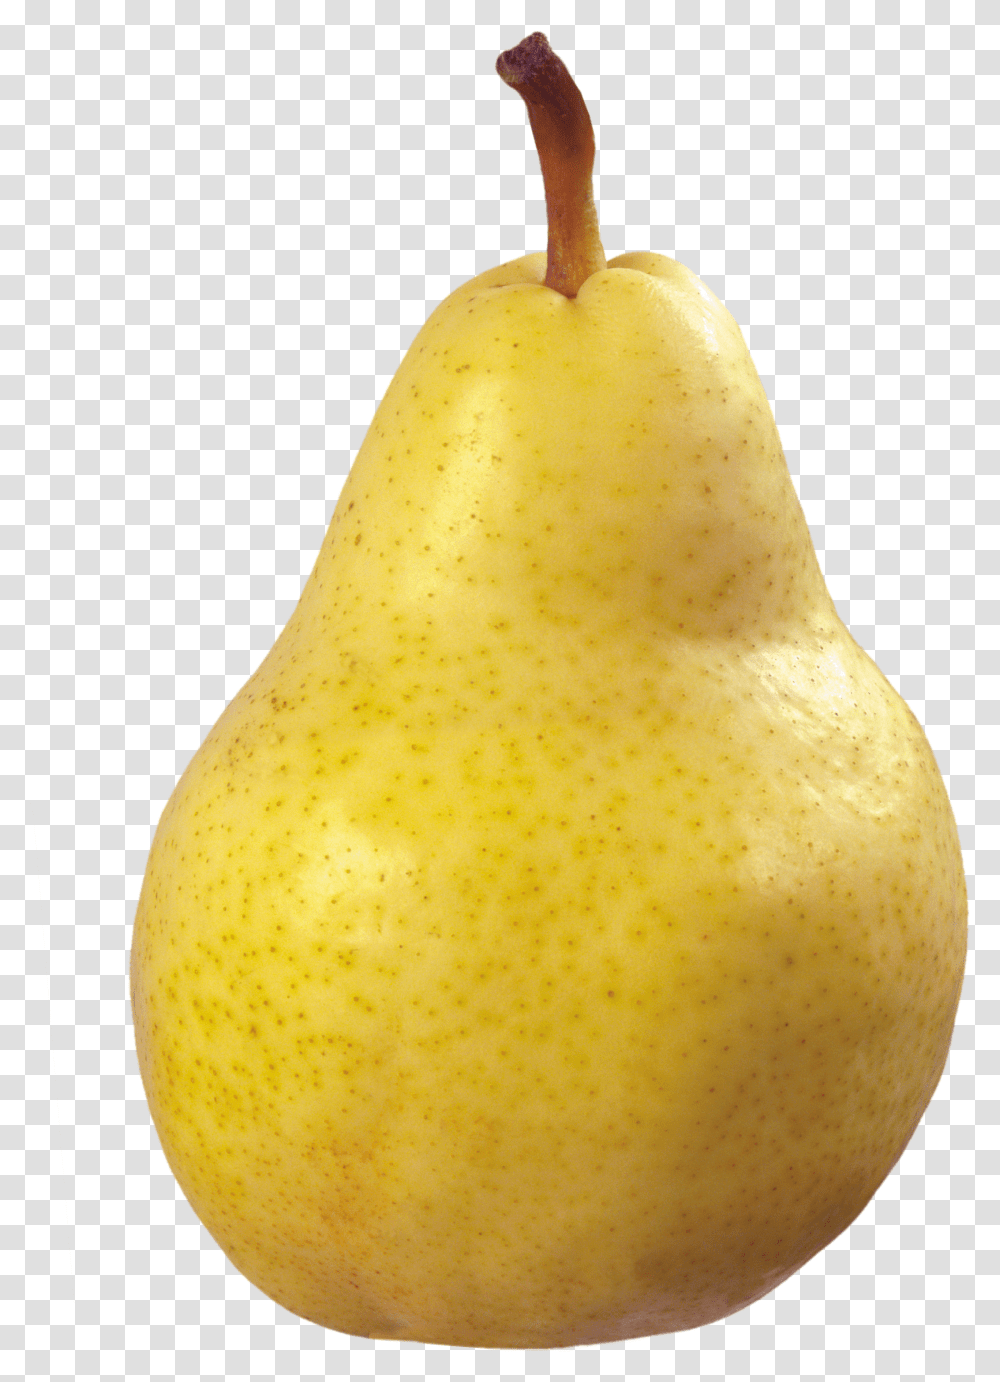 Yellow Pear Image Background Pear Transparent Png